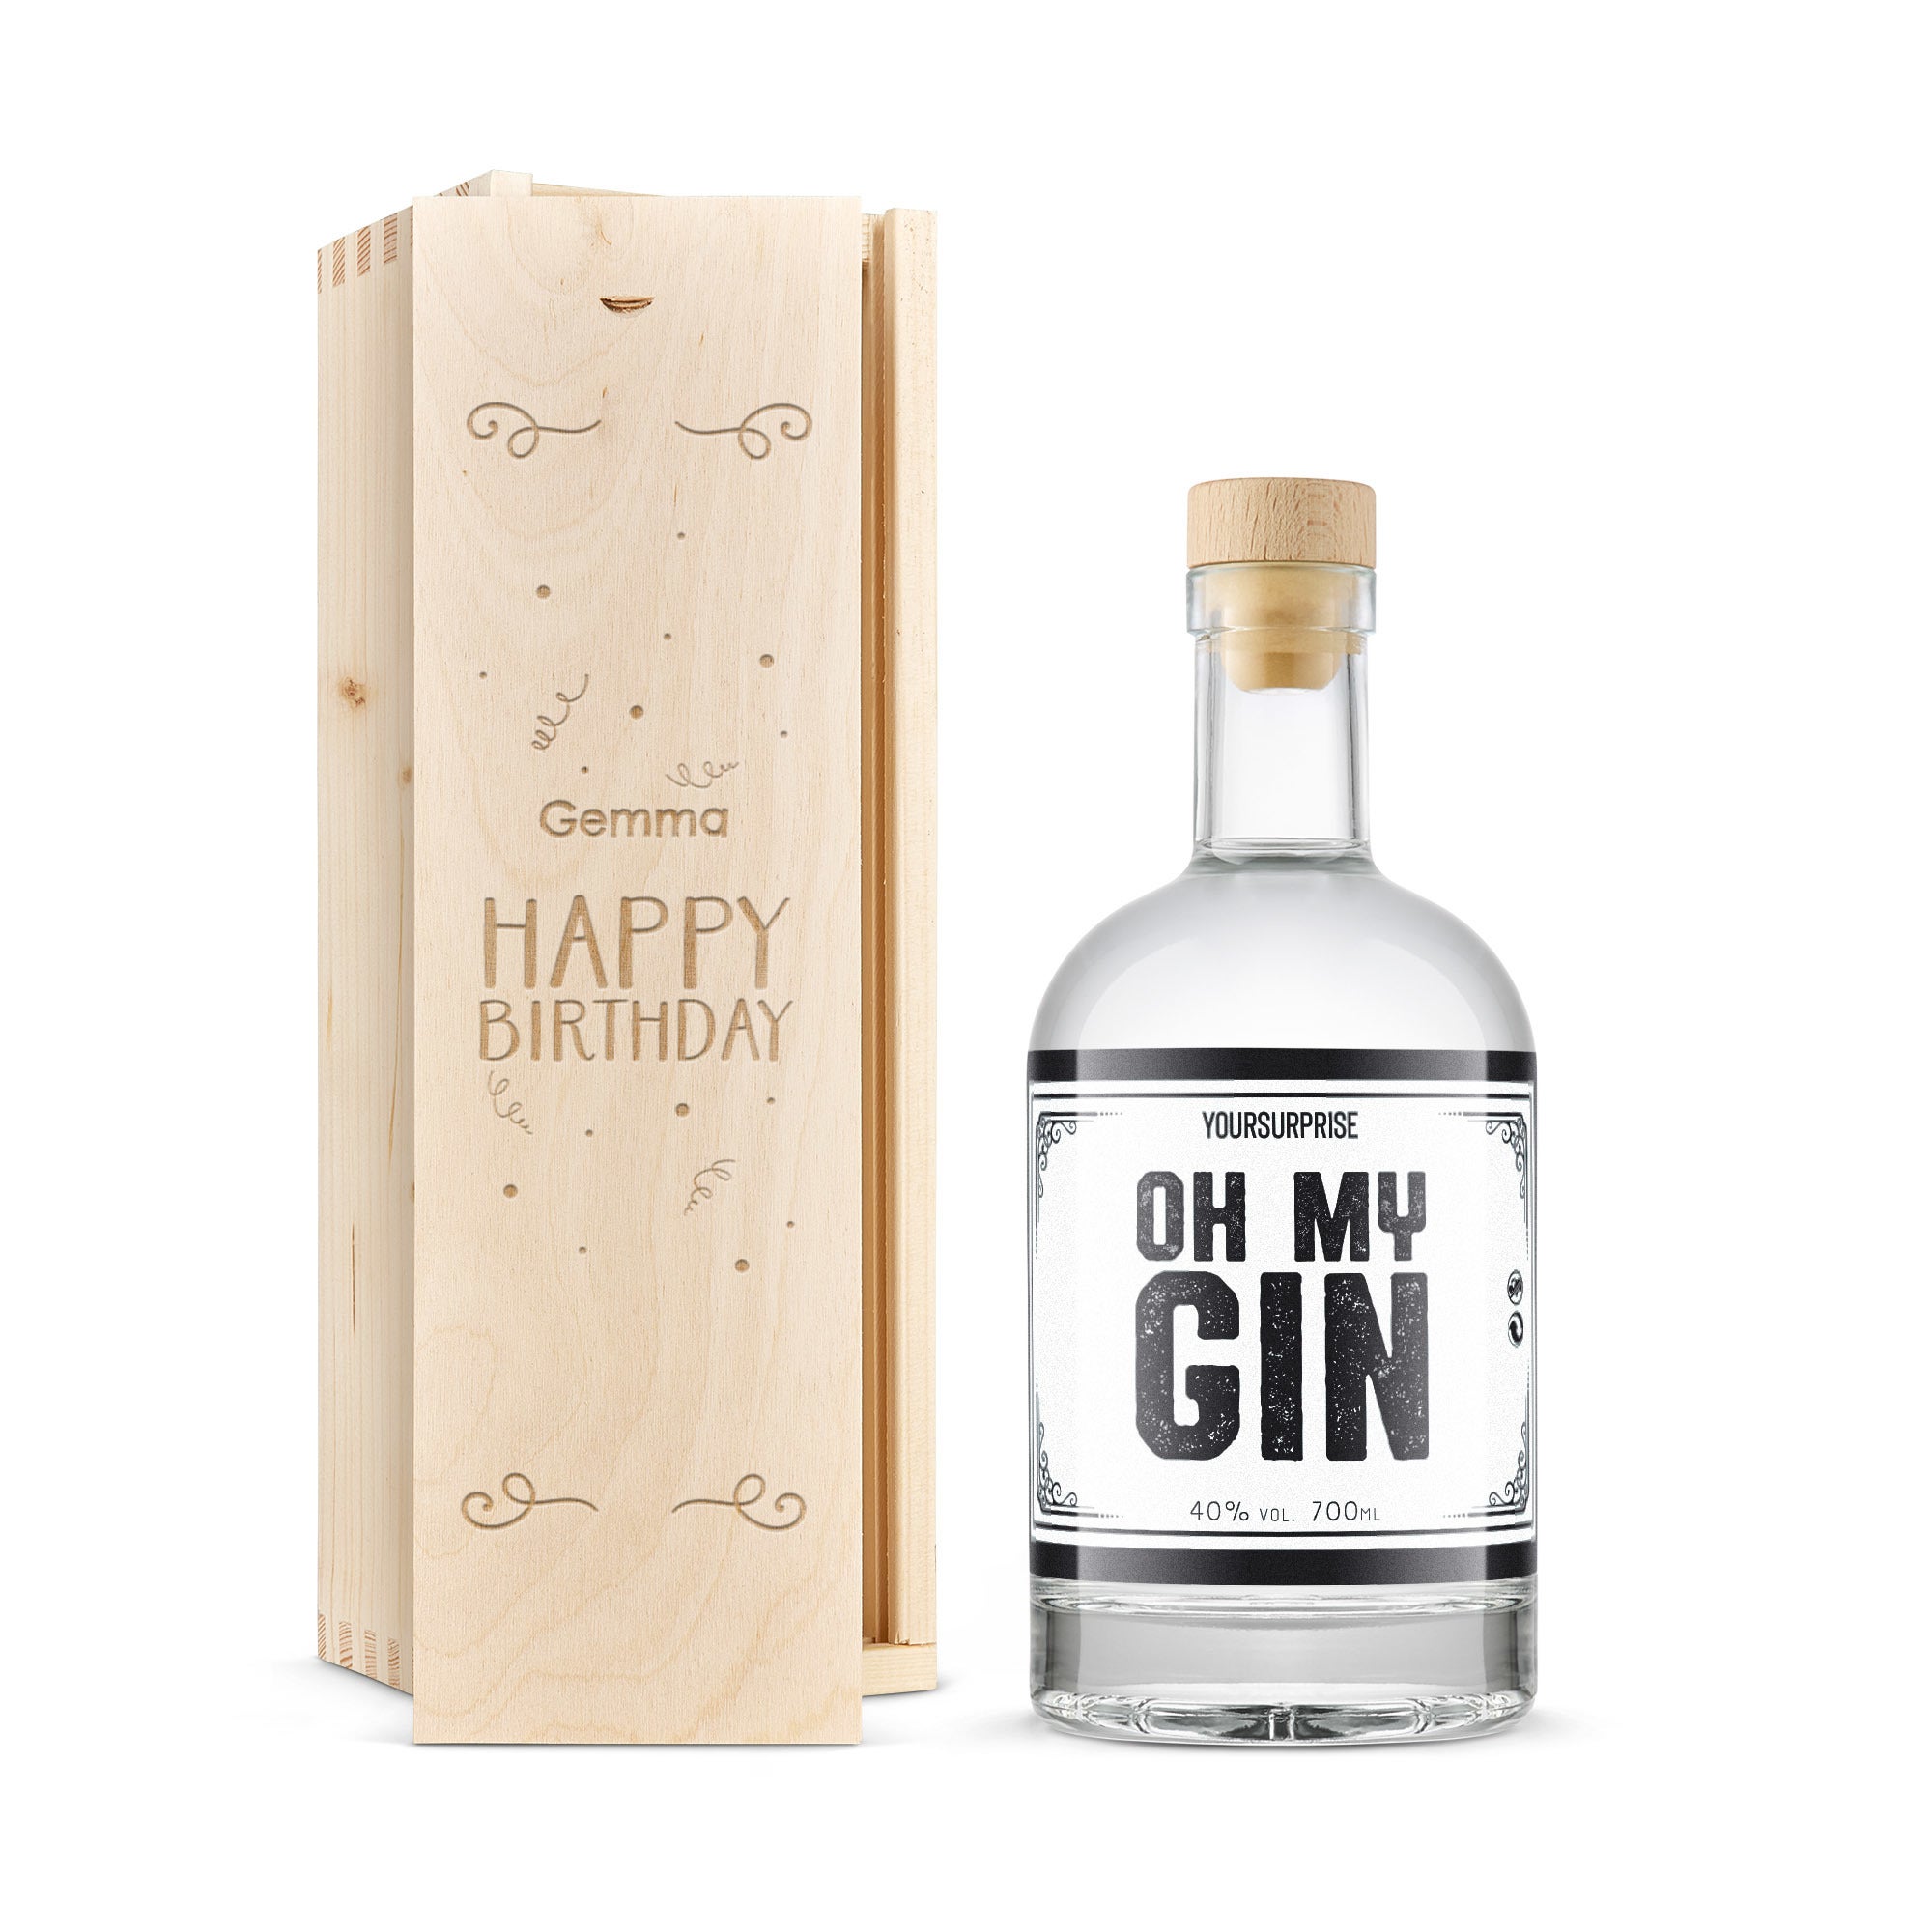 YourSurprise Gin Gift